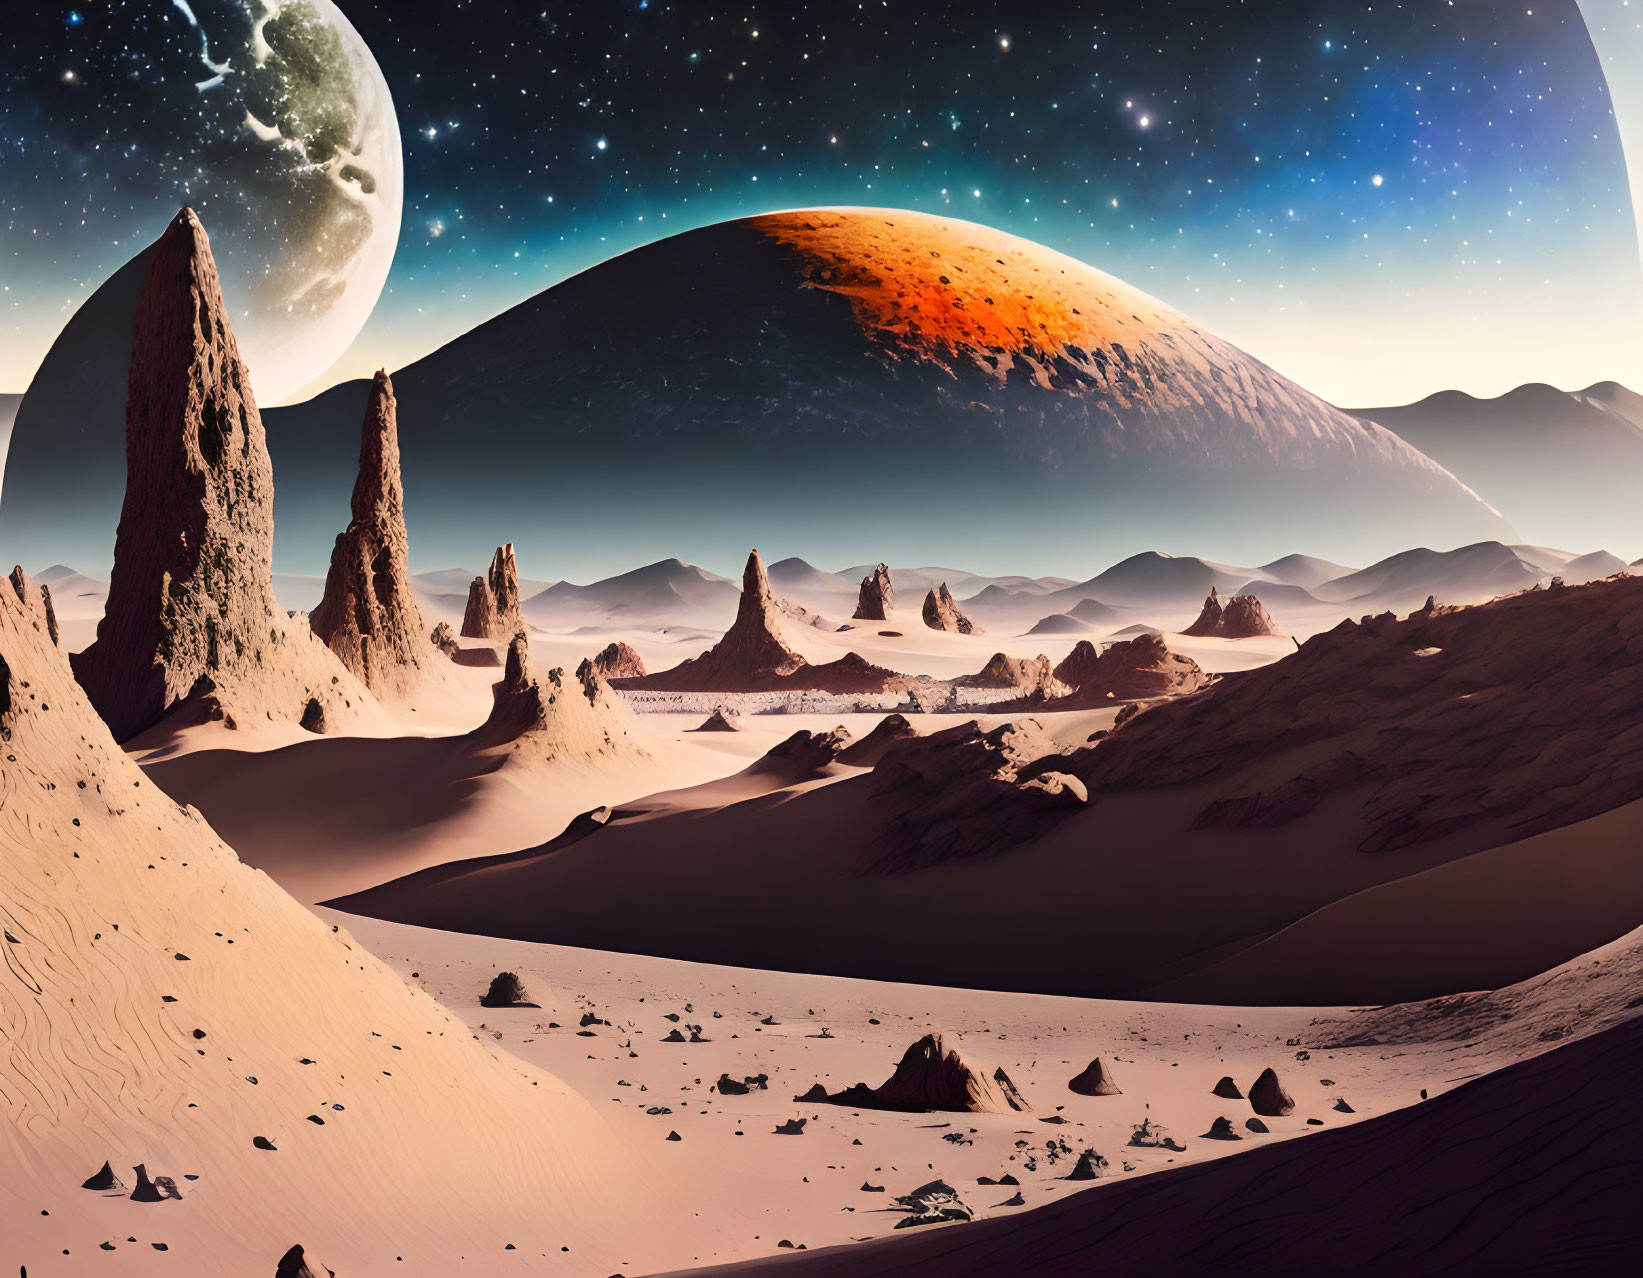 Alien landscape with towering rock formations and sandy dunes under twilight sky